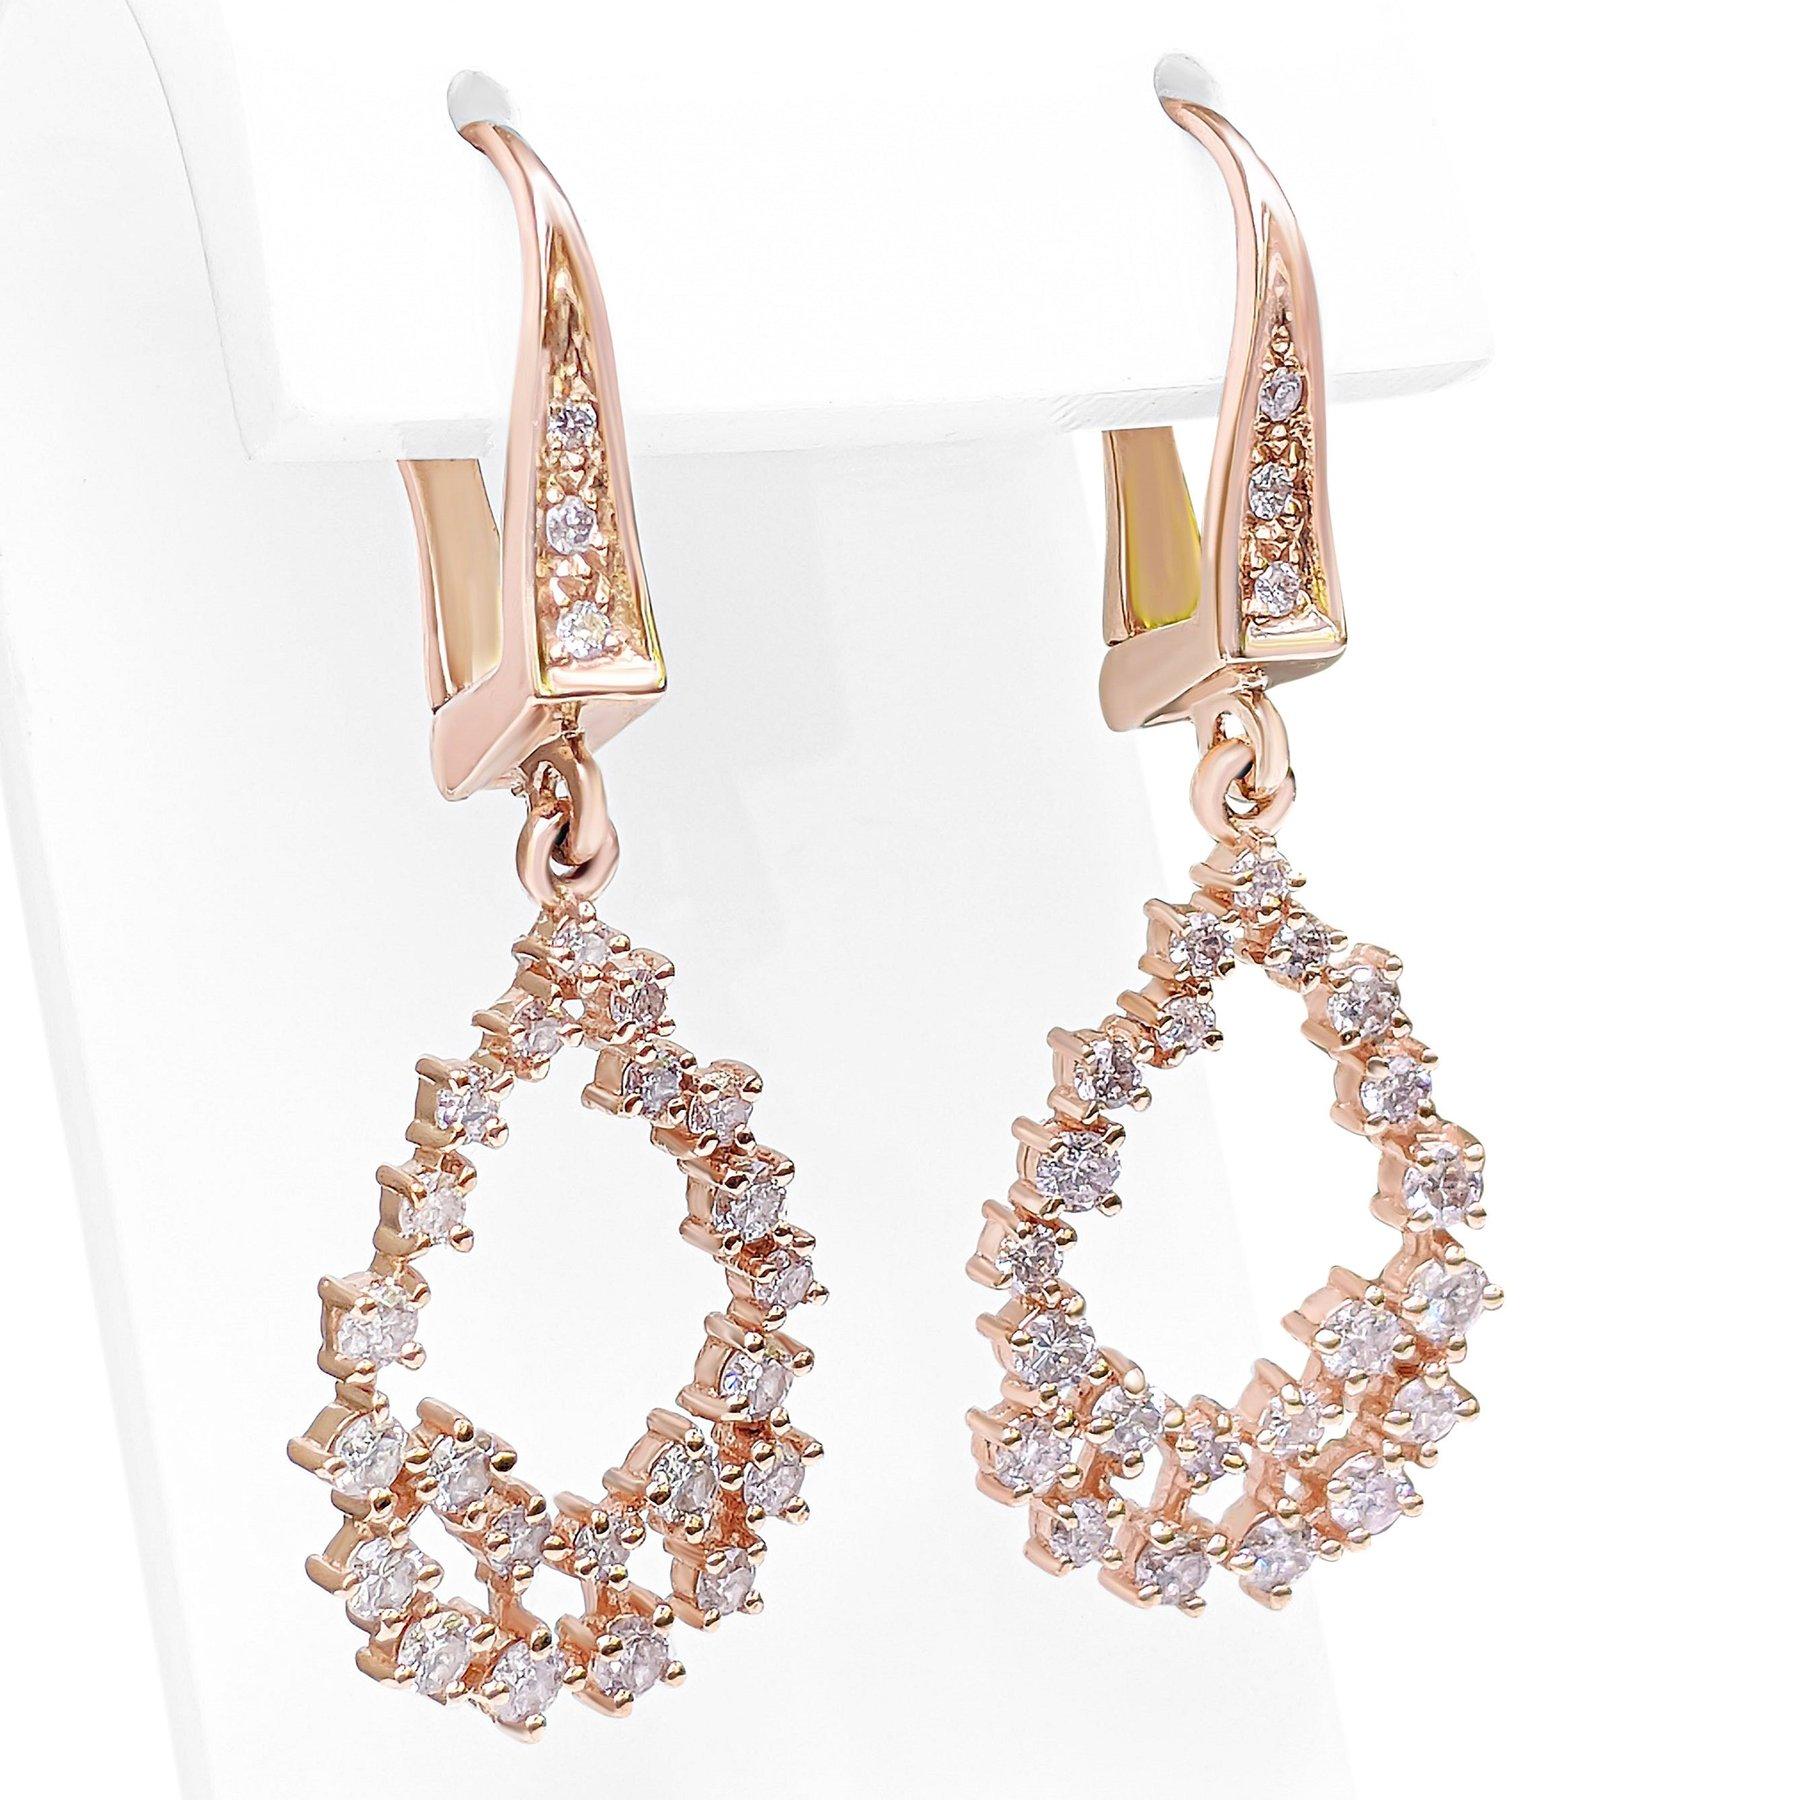 NO RESERVE! 1.05Cttw Fancy Pink Diamonds - 14 kt. Rose gold - Earrings For Sale 1